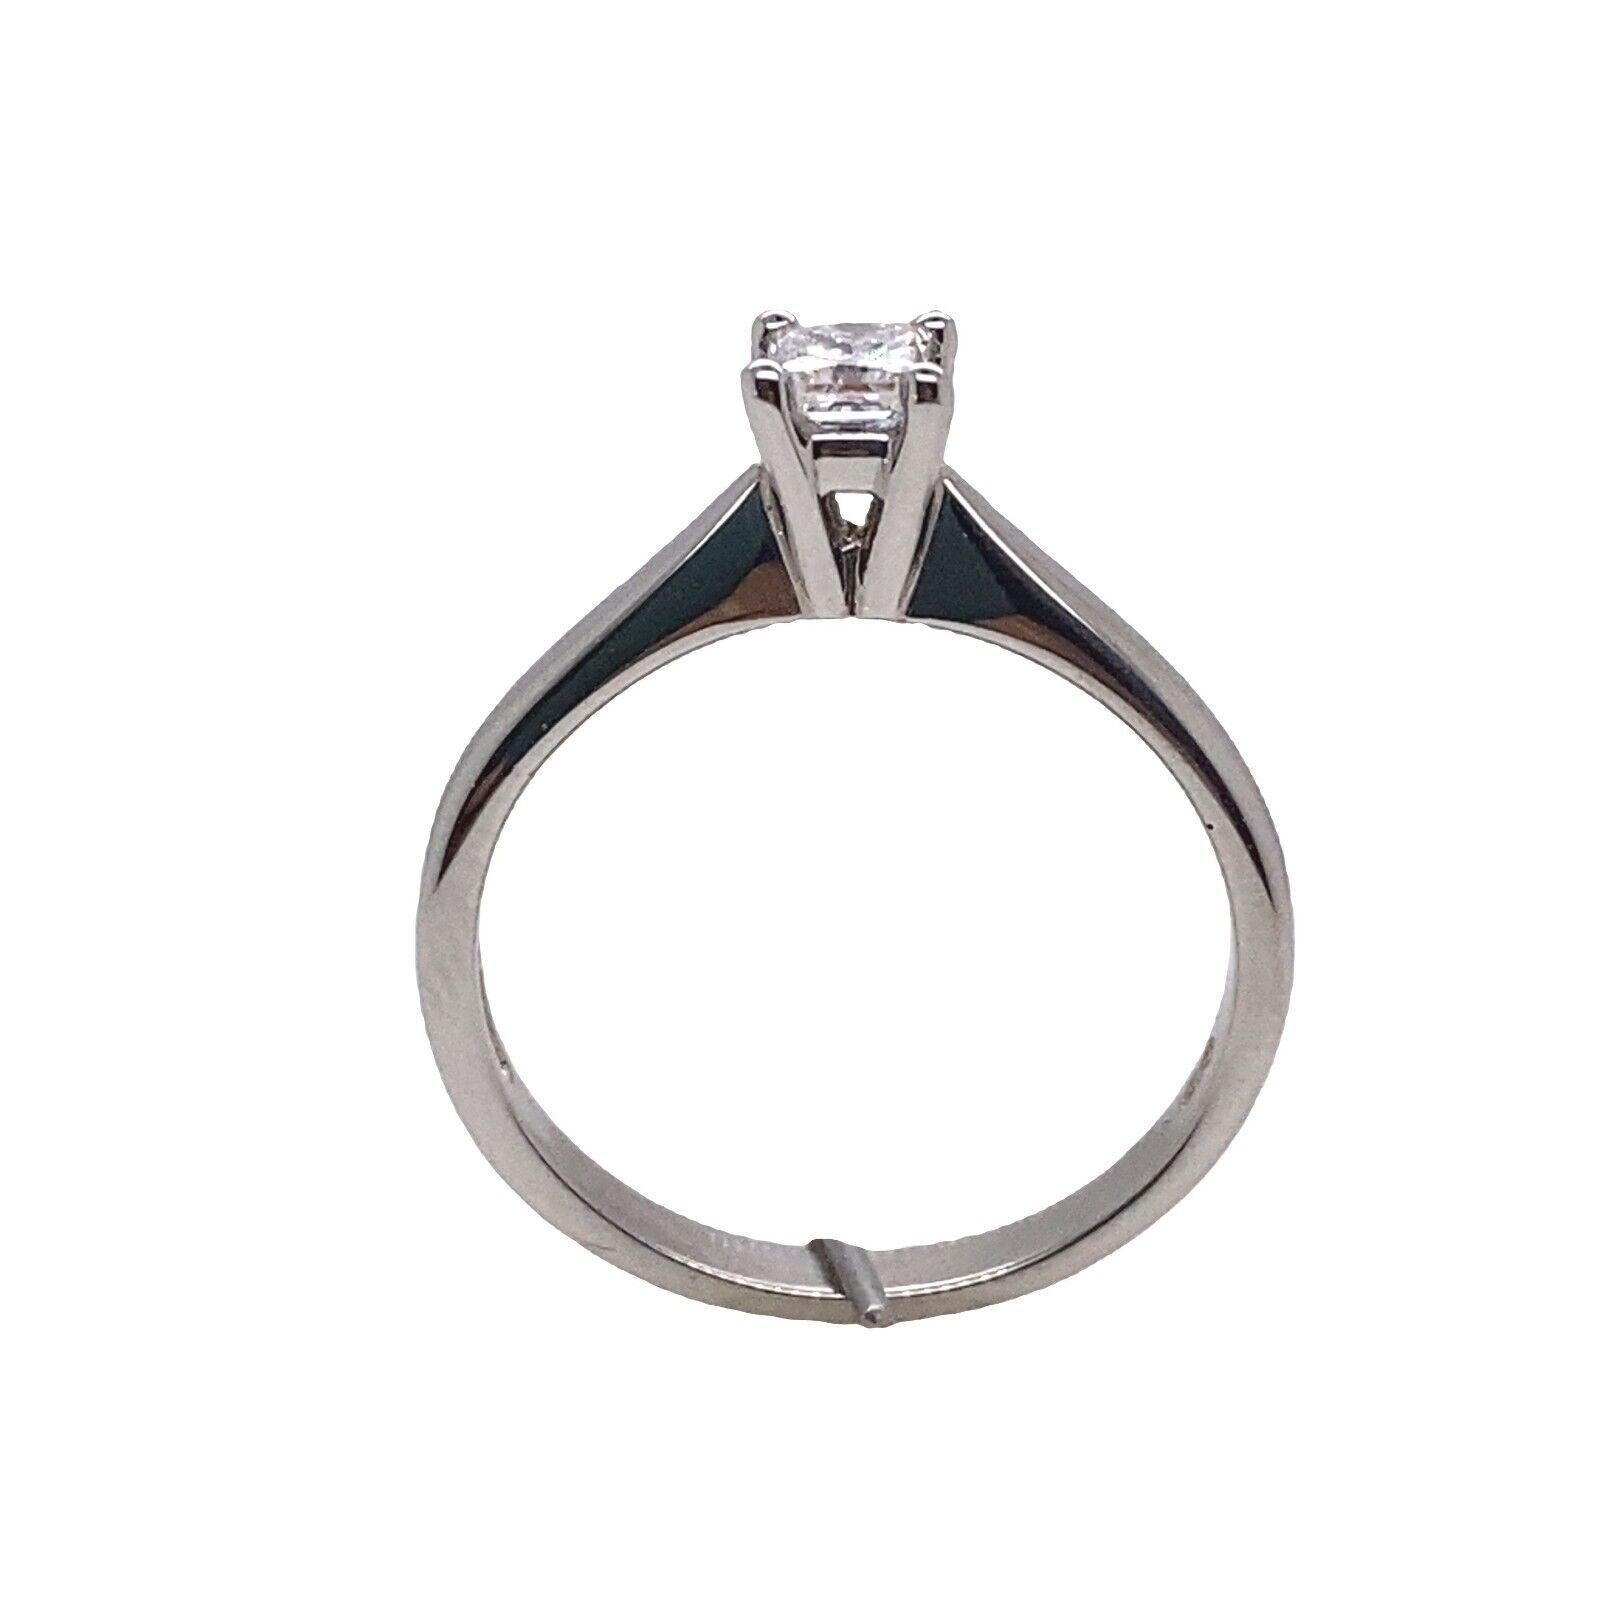 This solitaire diamond ring is the perfect symbol of your commitment to love. The platinum band is set with a 0.25ct diamond  and finished with high polished edges in platinum.  This ring is elegant and beautiful.

Additional Information:
Total